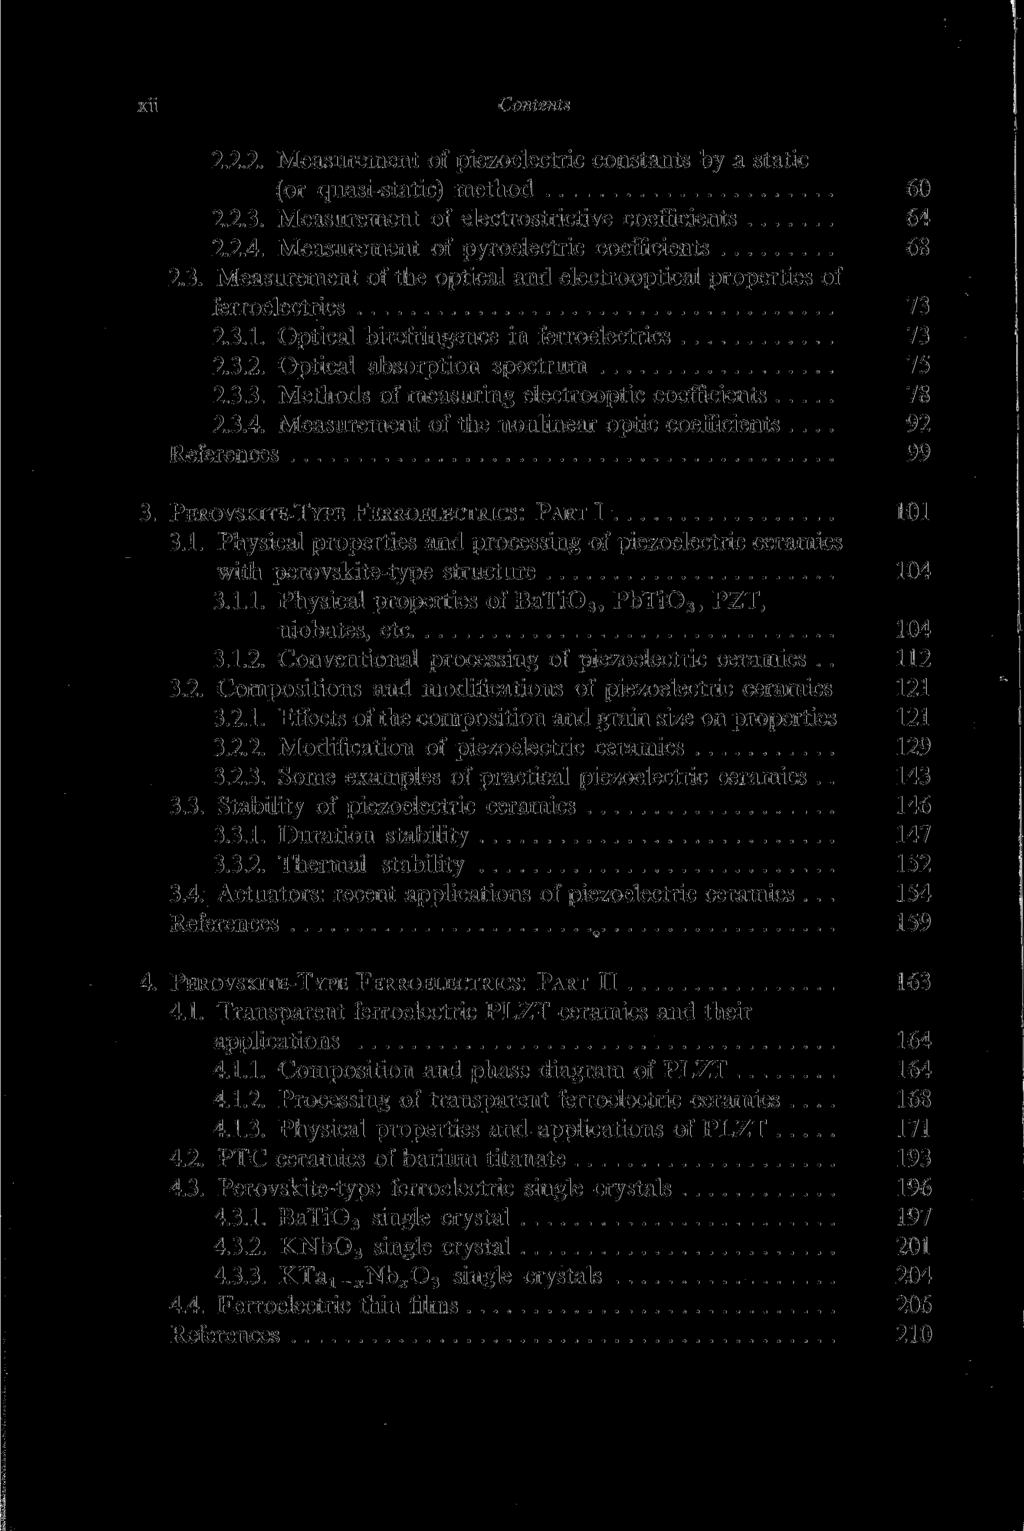 xii 2.2.2. Measurement of piezoelectric constants by a static (or quasi-static) method 60 2.2.3. Measurement of electrostrictive coefficients 64 2.2.4. Measurement of pyroelectric coefficients 68 2.3. Measurement of the optical and electrooptical properties of ferroelectrics 73 2.